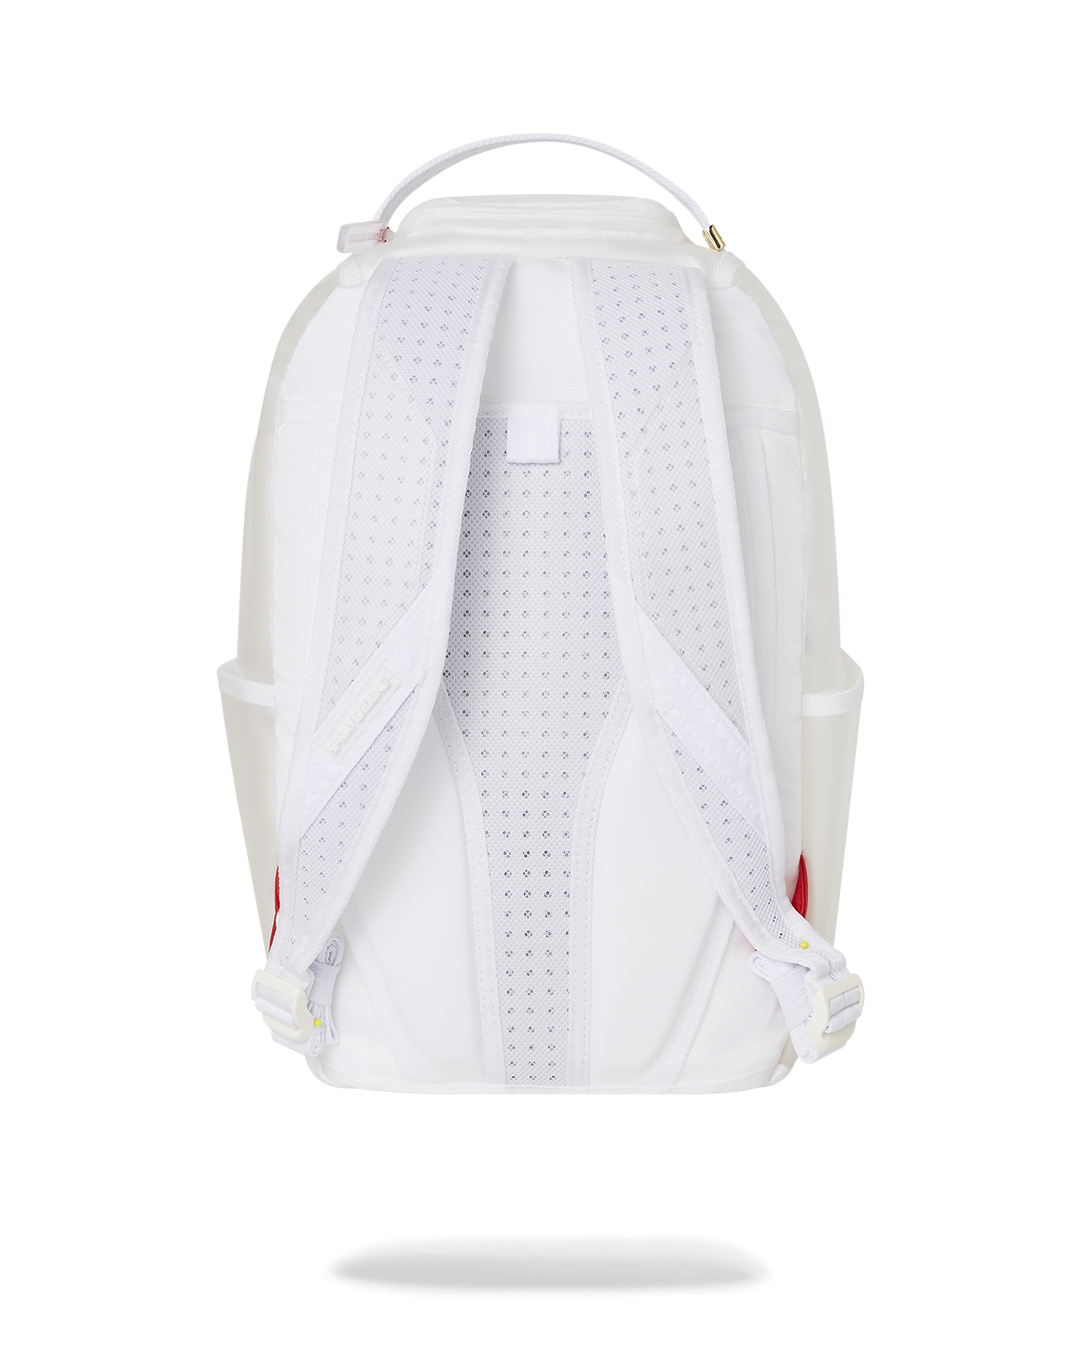 CASPER FROSTED DLX BACKPACK